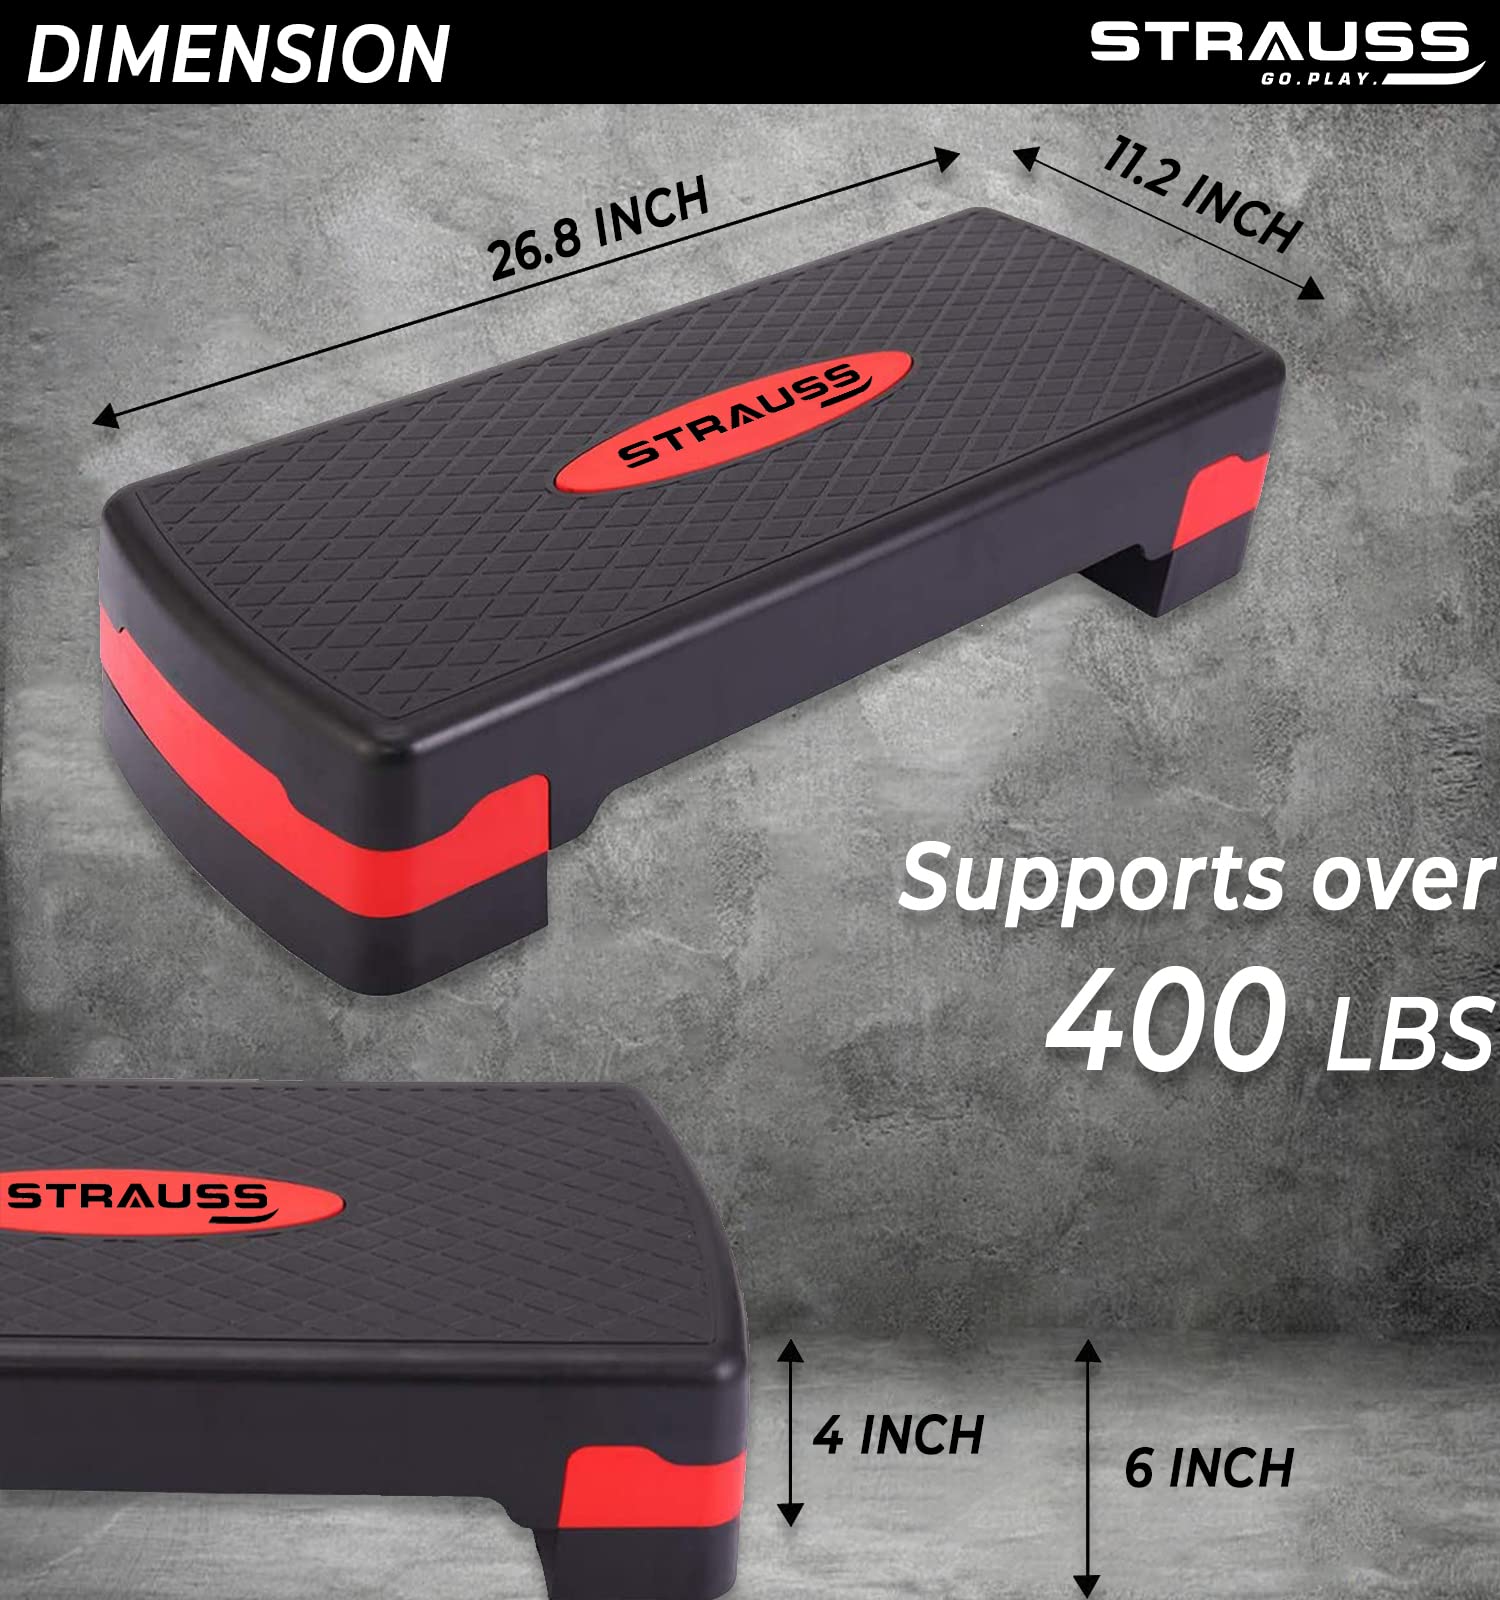 Strauss Aerobic Stepper | Two Height Level Adjustments - 4 inches and 6 inches | Slip-Resistant & Shock Absorbing Platform for Extra-Durability - Supports Upto 200 KG, (Red)